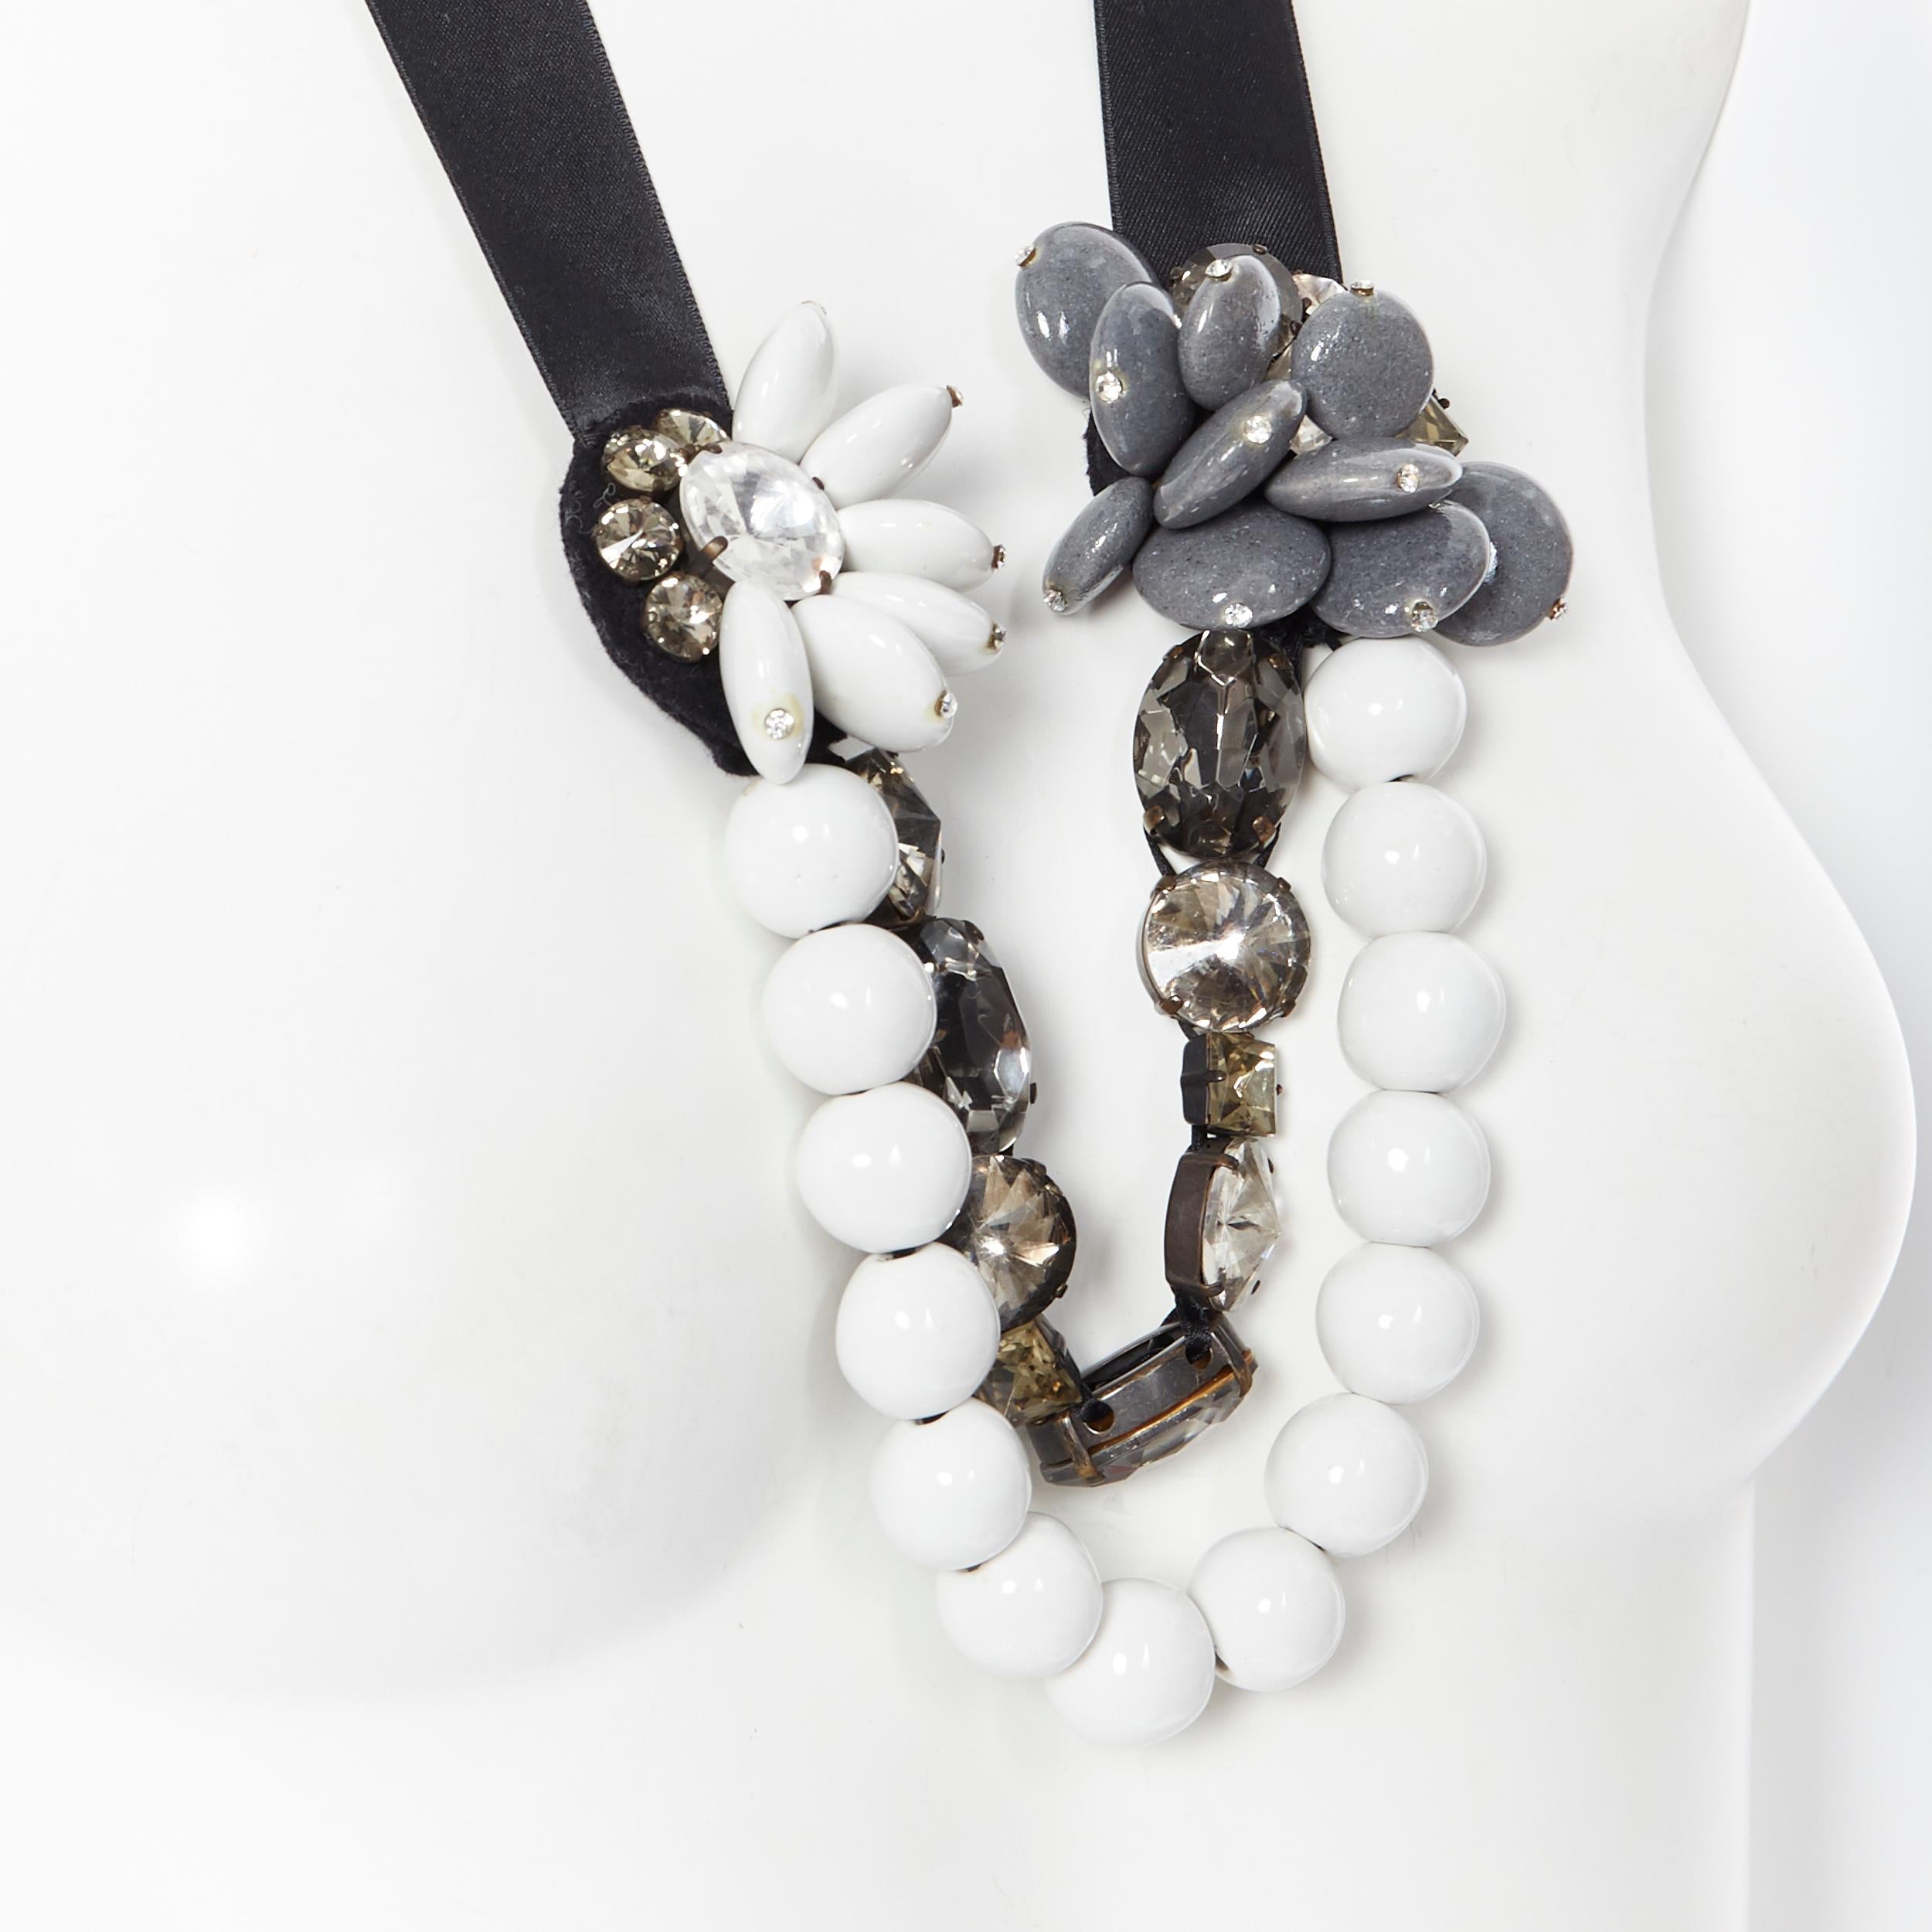 MARNI white bead floral jewel crystal embelished ribbon statement necklace
Brand: Marni
Designer: Marni
Model Name / Style: Statement necklace
Material: Resin
Color: Multicolour
Pattern: Solid
Closure: Tie
Made in: Italy

CONDITION: 
Condition: Very